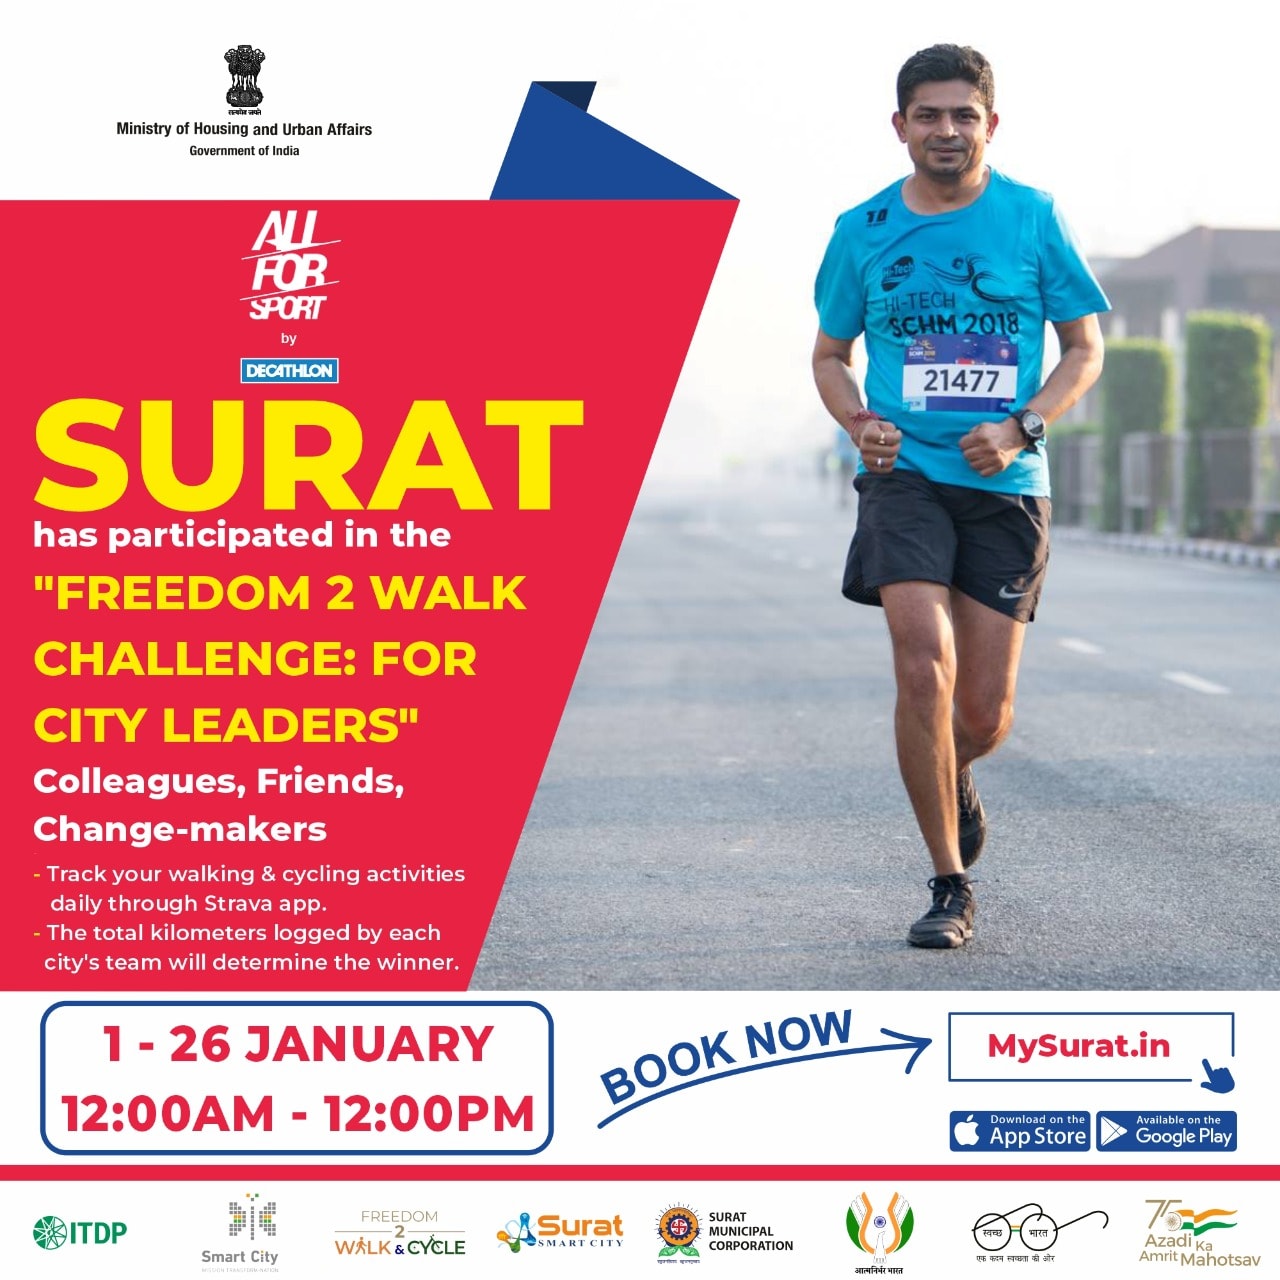 Surat Participates In The "Freedom 2 Walk Challenge: for City Leaders"